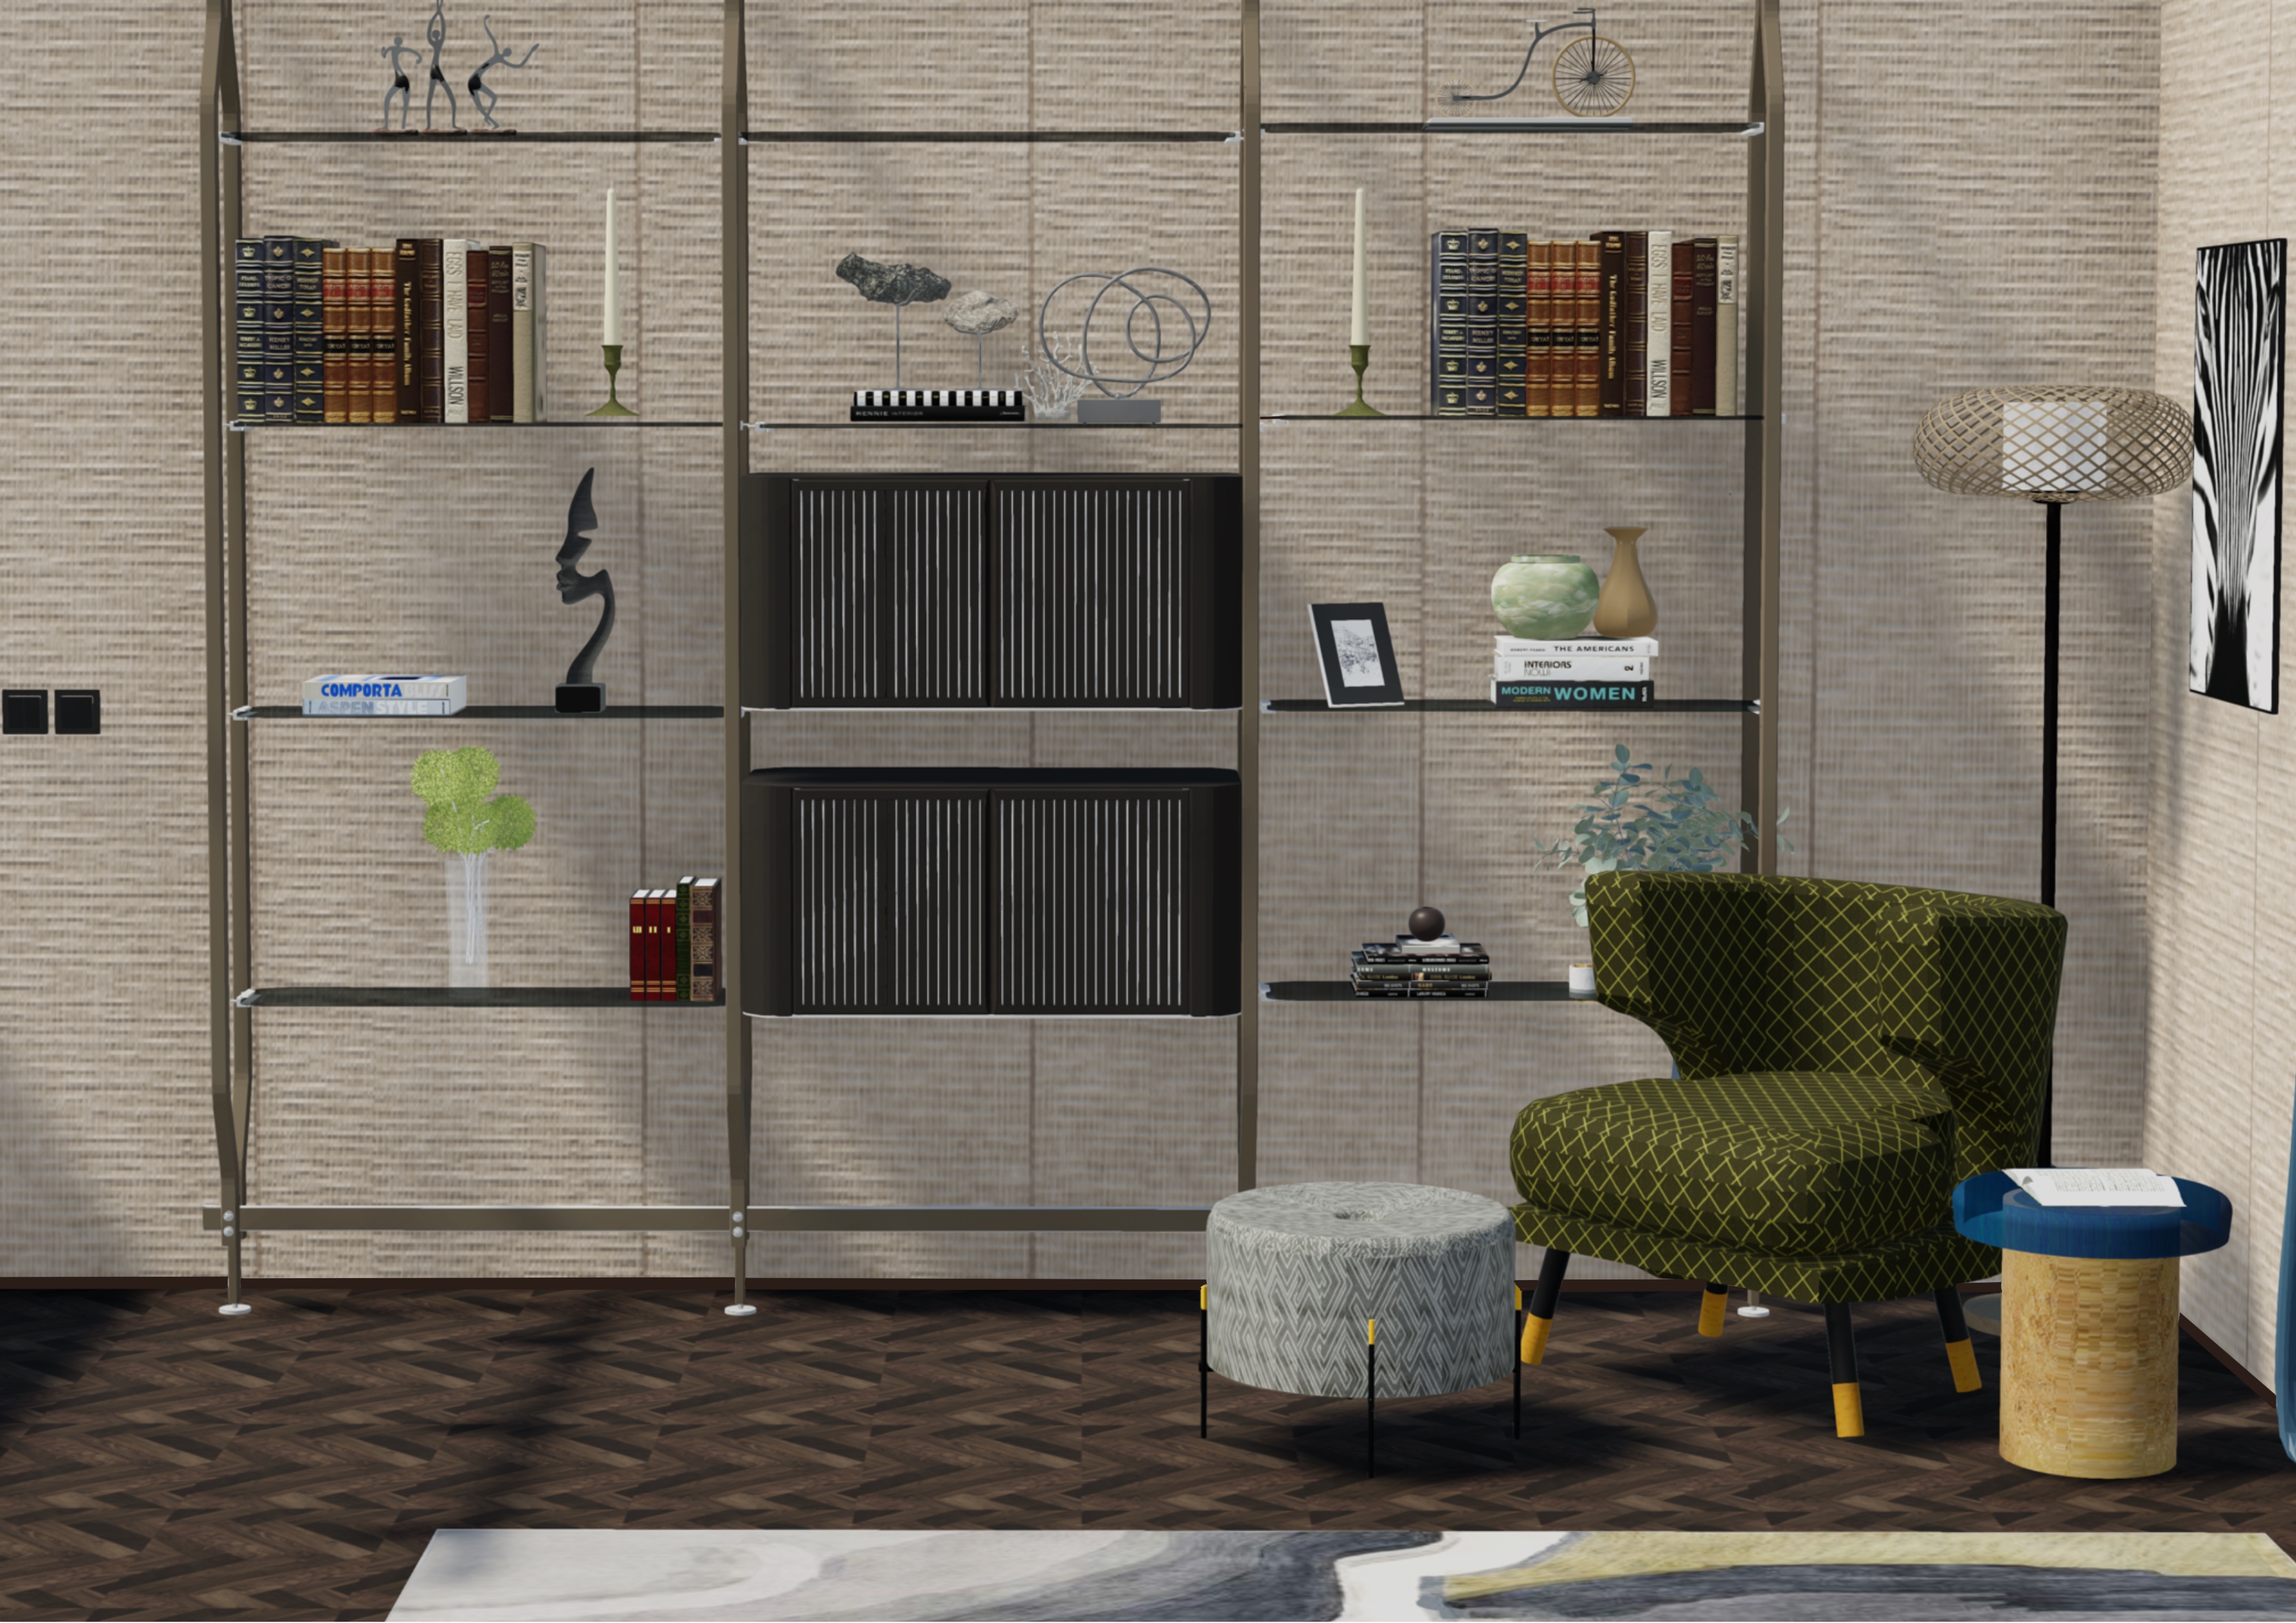 Refined bedroom design tailored for an accomplished professional. Bookcase view.